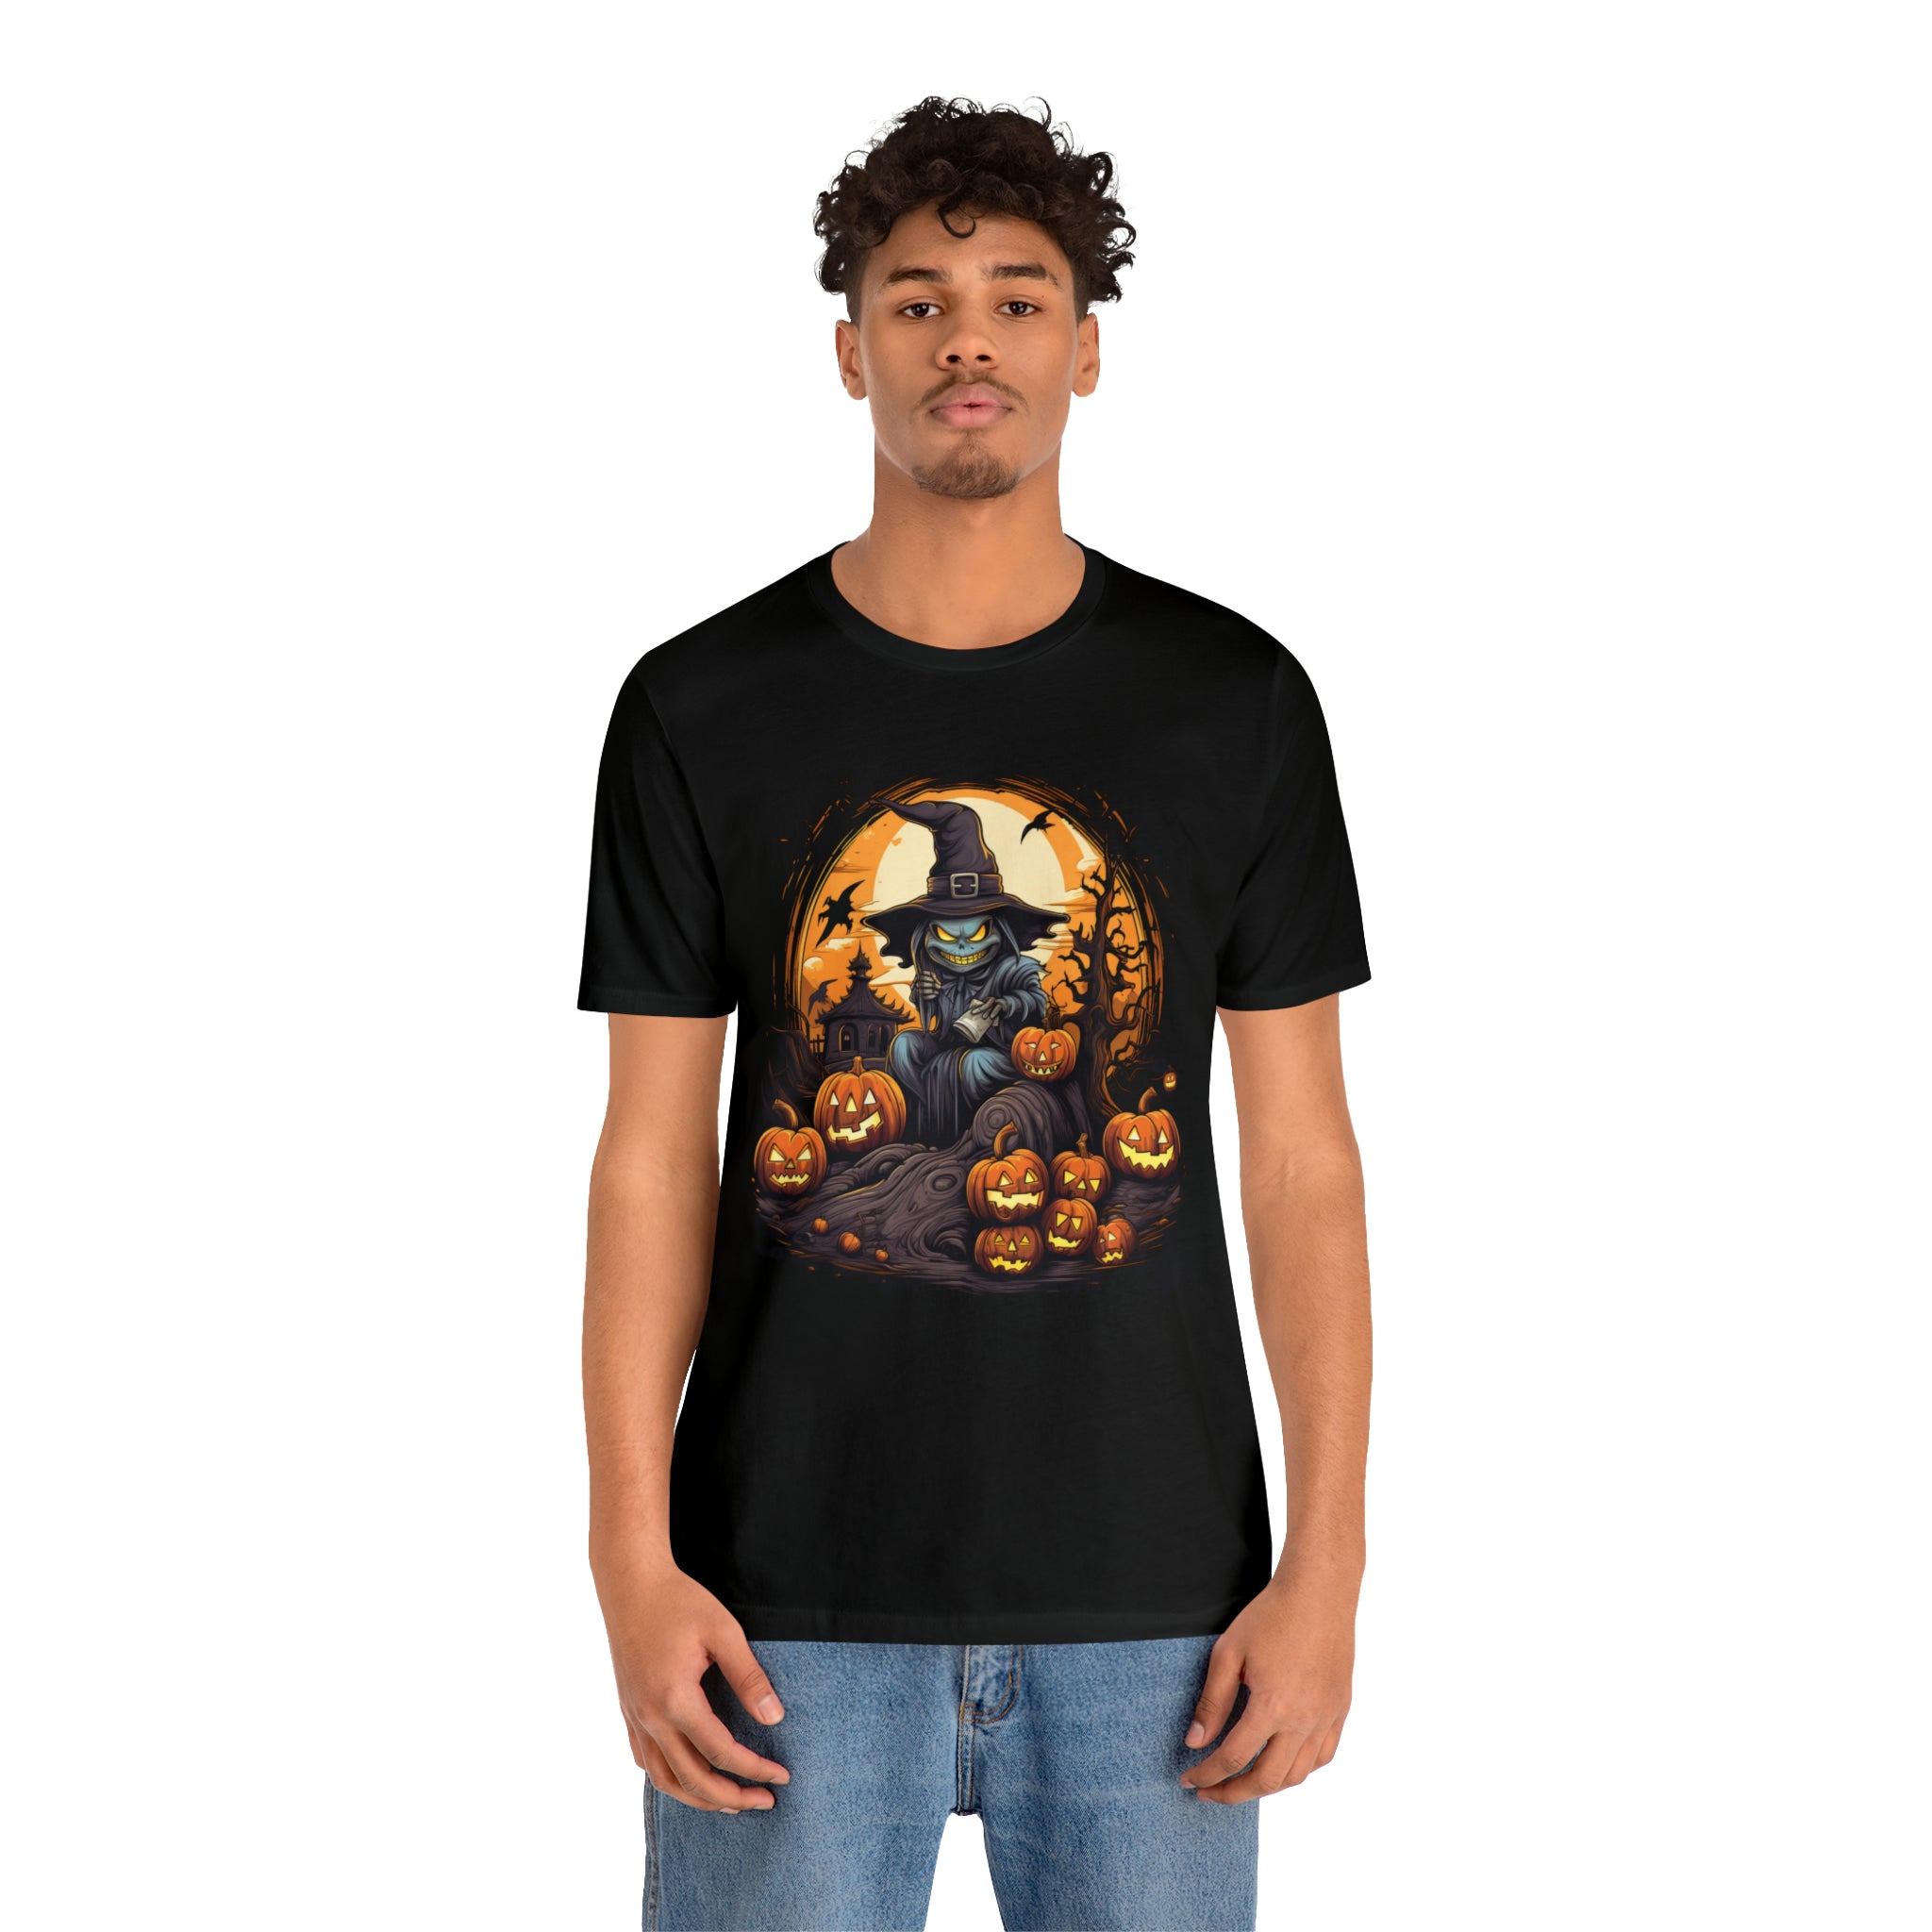 Witch's Brew Jack-o'-Lanterns Halloween Graphic Tee - Unisex Cotton T-Shirt for Spooky Season Enthusiasts